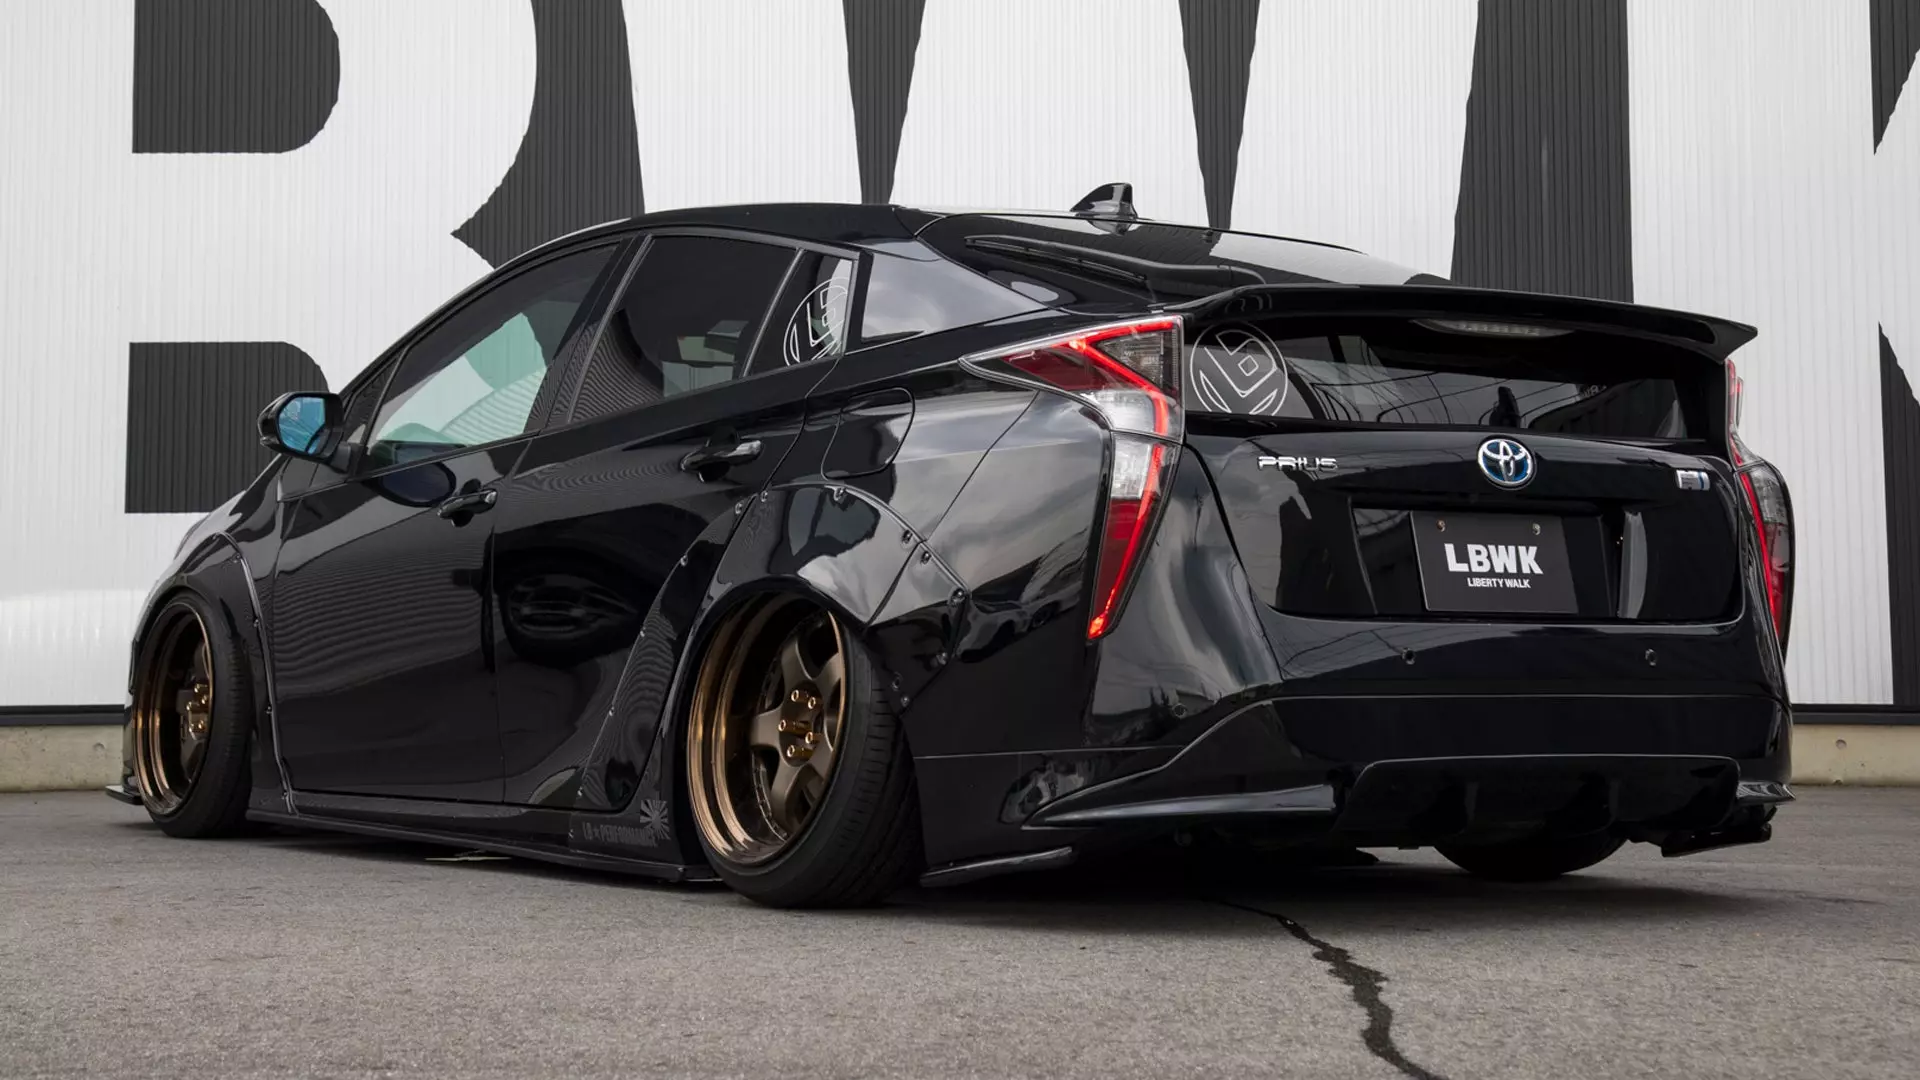 Your Toyota Prius Could Look Pretty Cool if You’re Willing To Spend $24,000 on a Body Kit | Autance